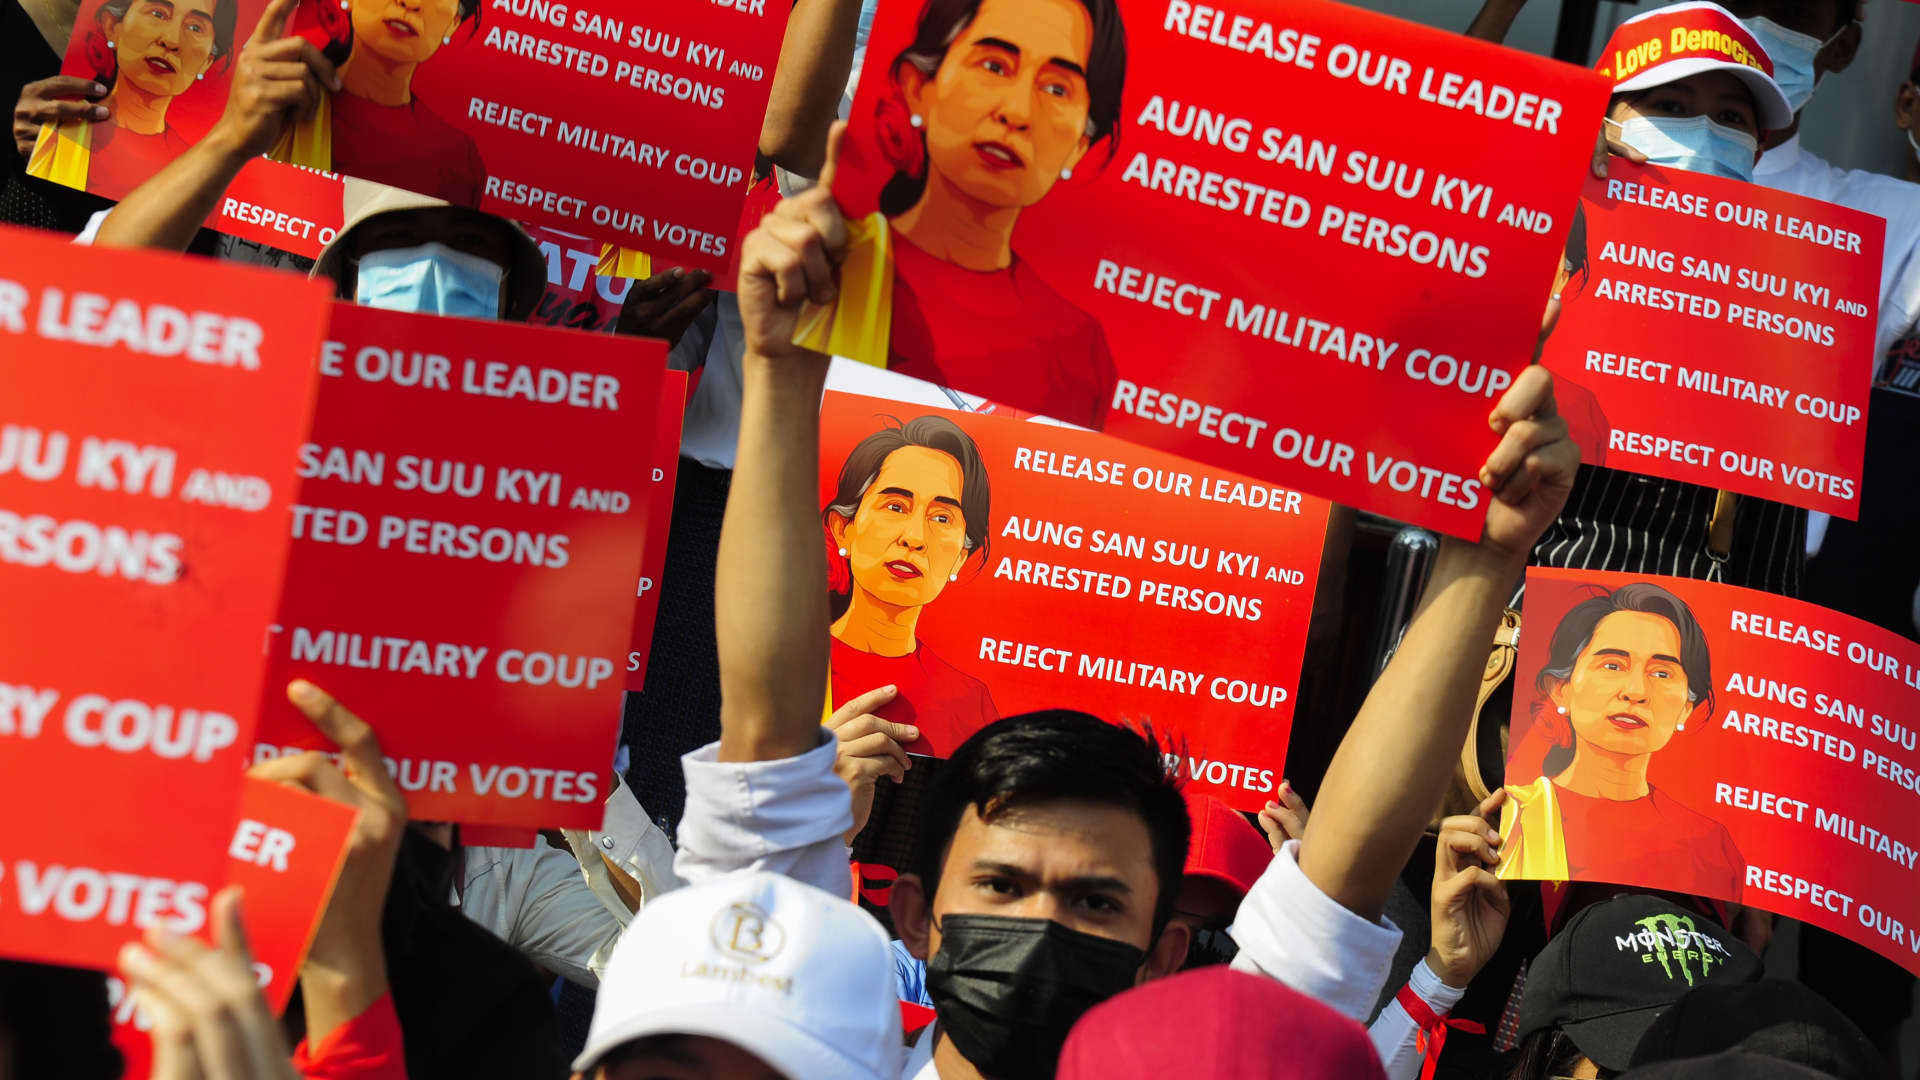 Anti-coup protesters hold placards as they protest against the military coup Saturday, February 20, 2021, in Yangon, Myanmar.